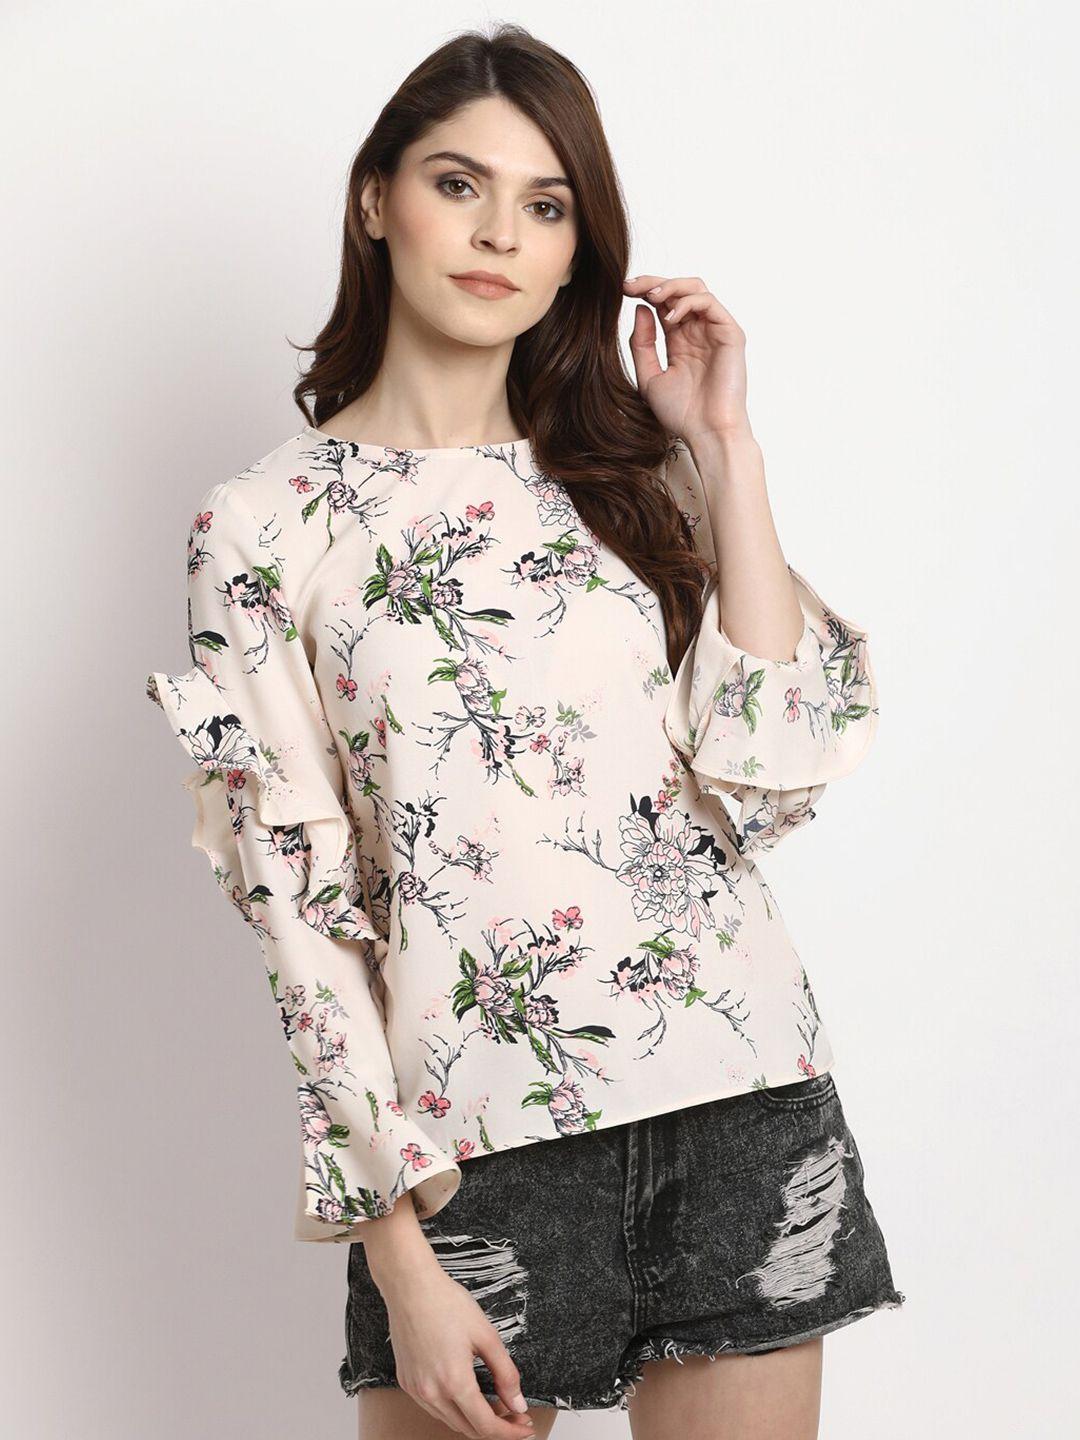 marie-claire-beige-&-black-floral-printed-flared-sleeves-ruffles-top